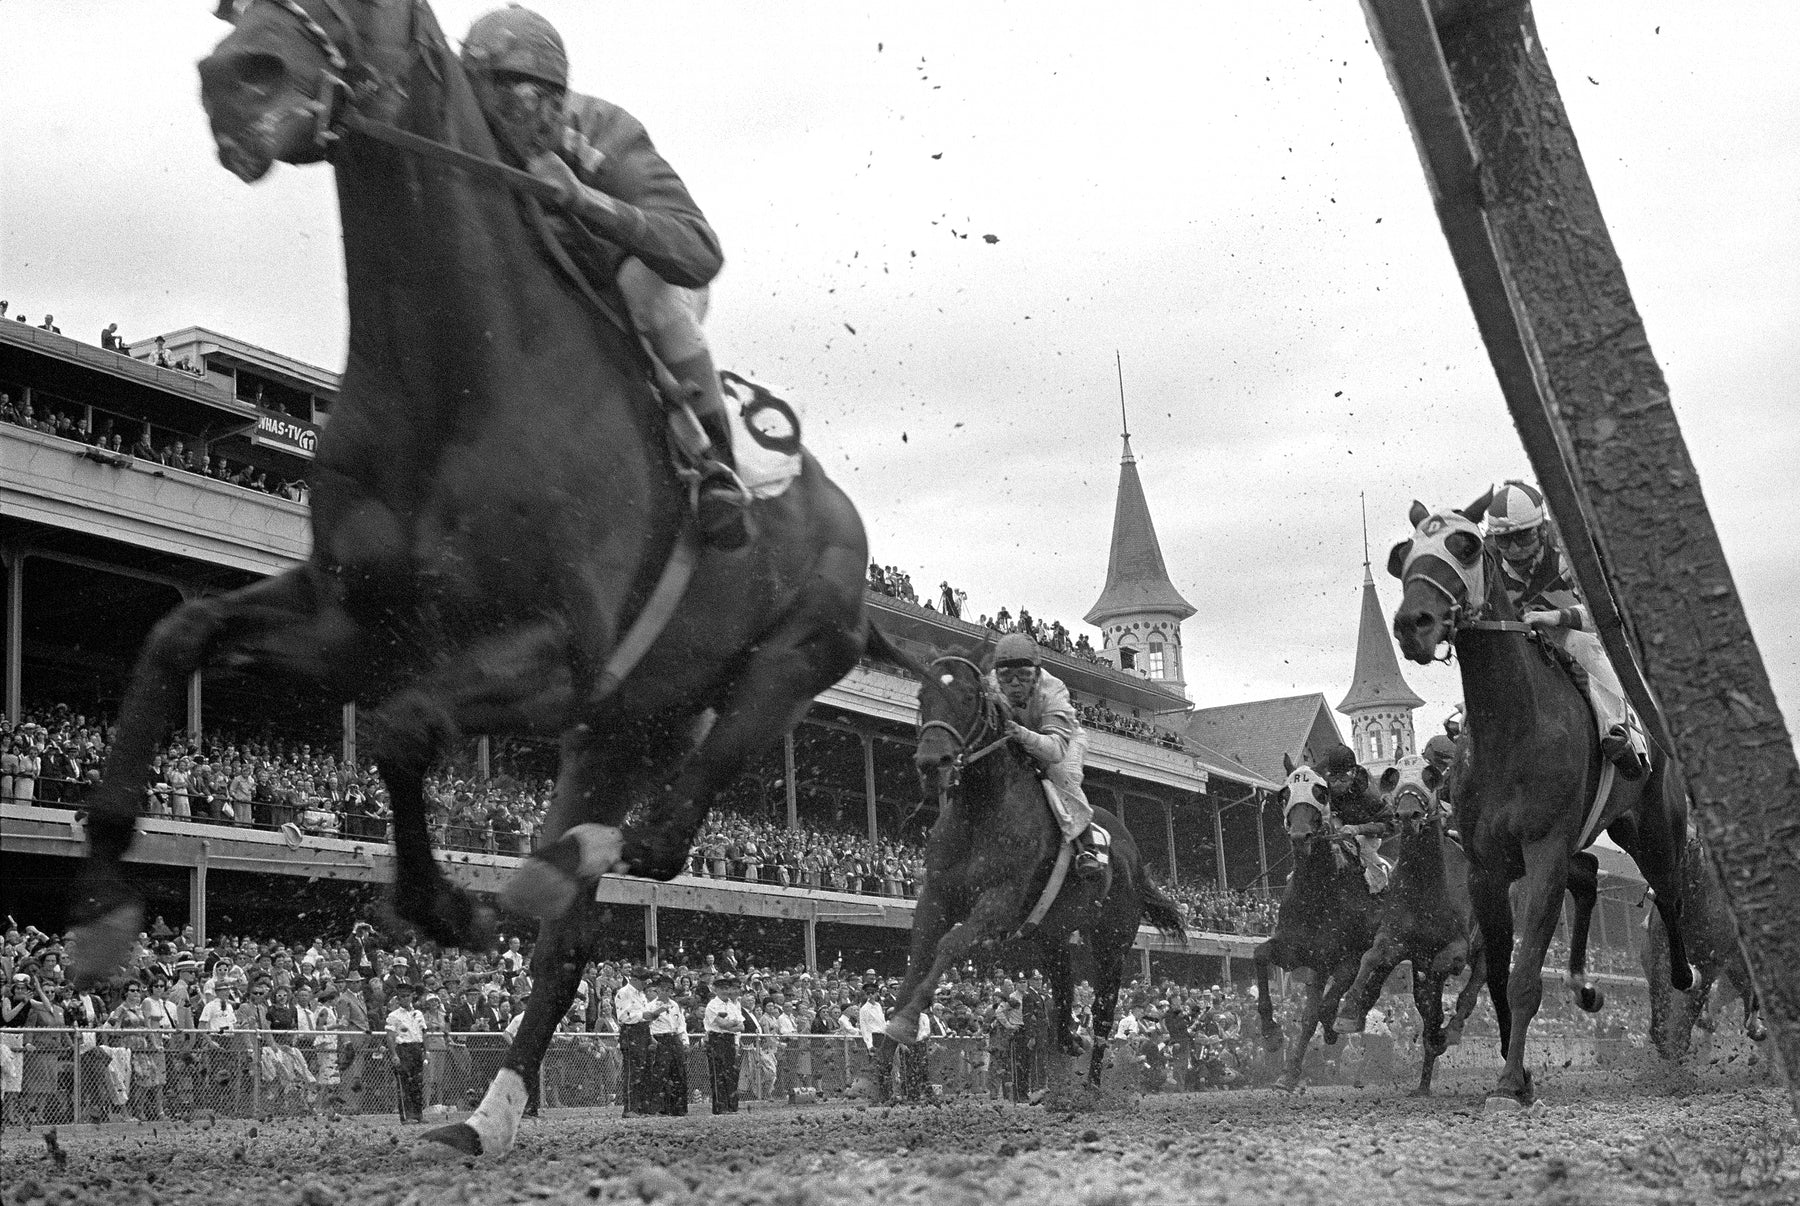 1961 Kentucky Derby, The First Turn at Churchill Downs